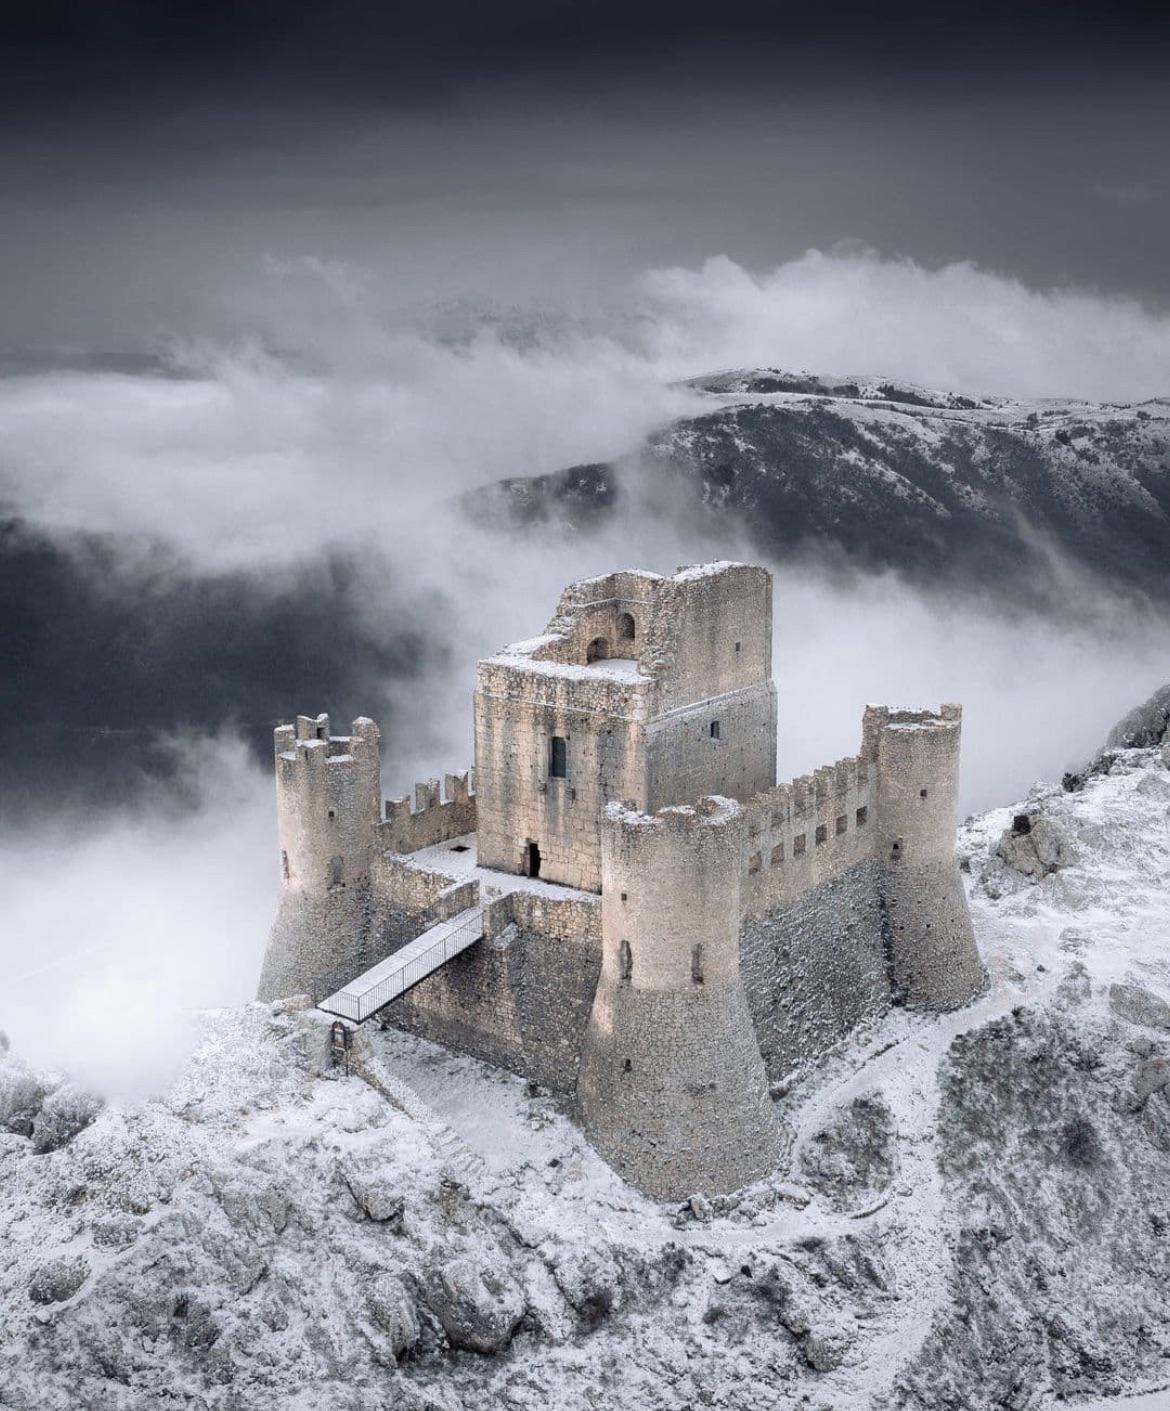 The Castle of Rocca Calascio in Abruzzo, Italy, is the highest castle in the Apennines. Built in the tenth century it is unusual as it was built to accommodate troops, and never as a residence for nobility.jpg